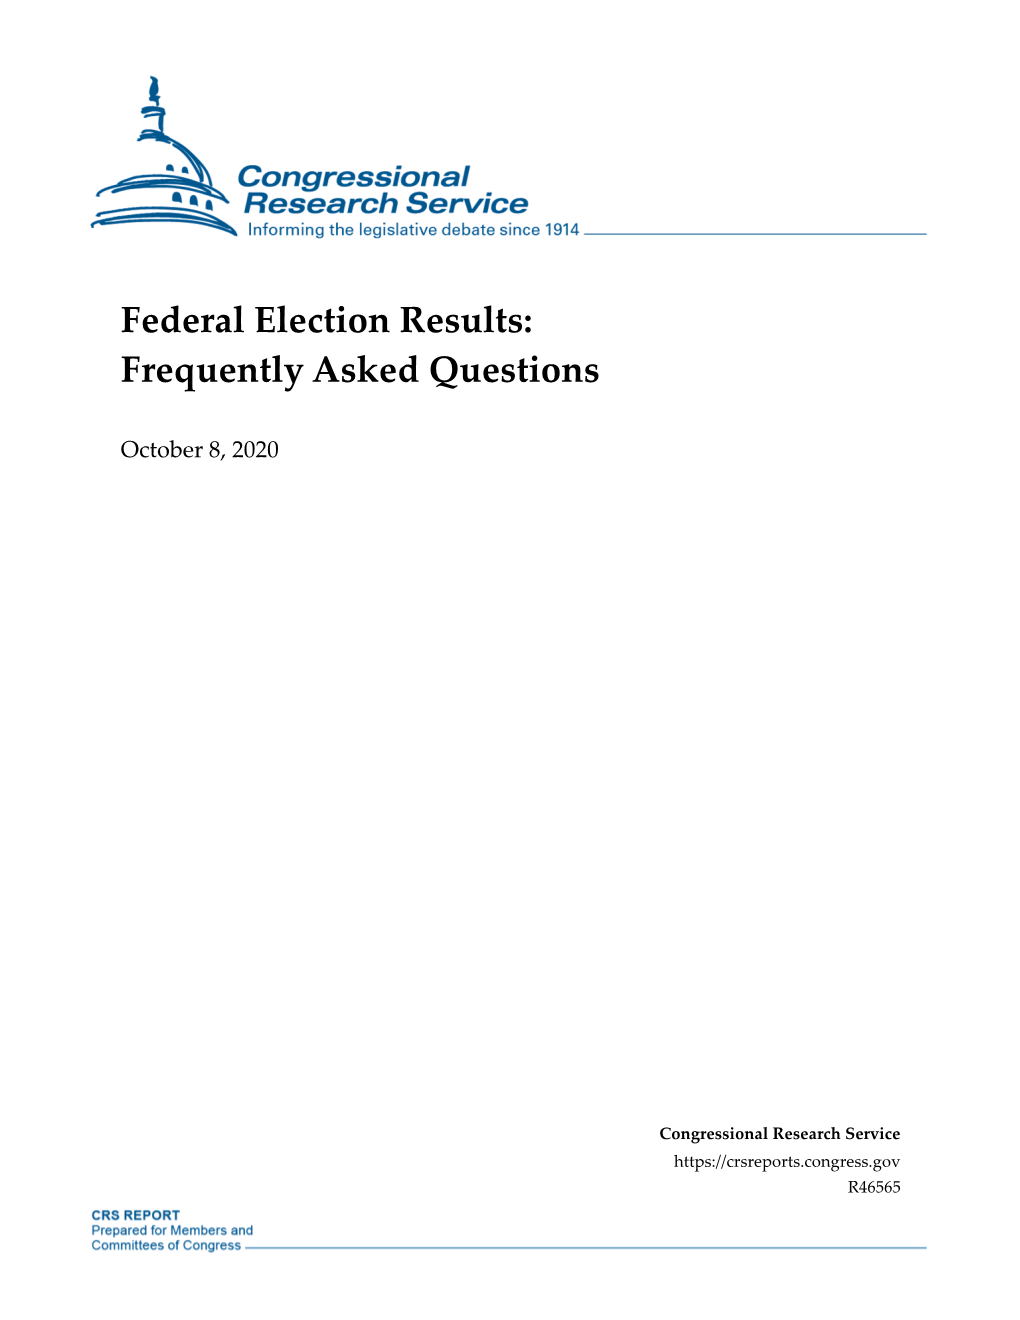 Federal Election Results: Frequently Asked Questions